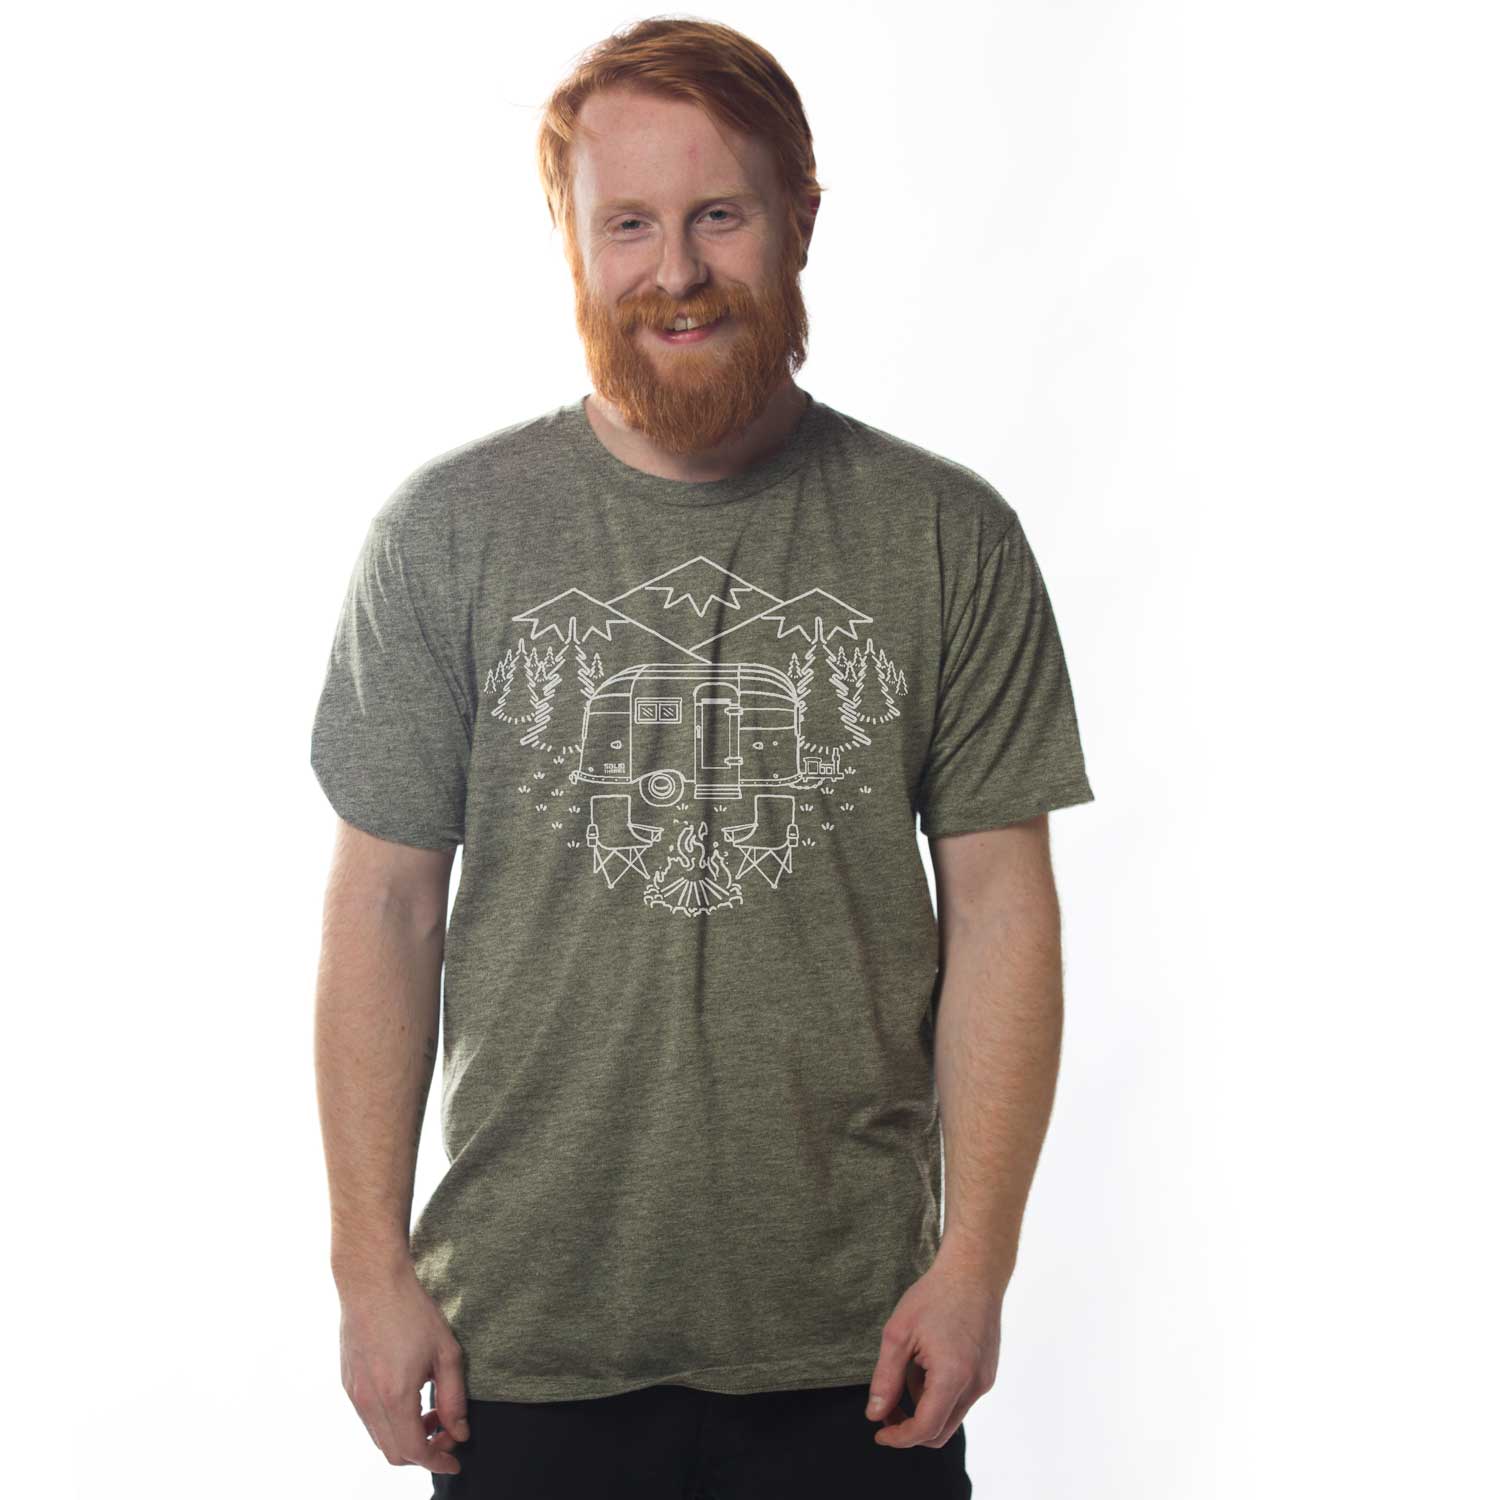 Camp Site Retro Hiking Graphic Tee | Cool Outdoor Adventure T-Shirt Olive / Large